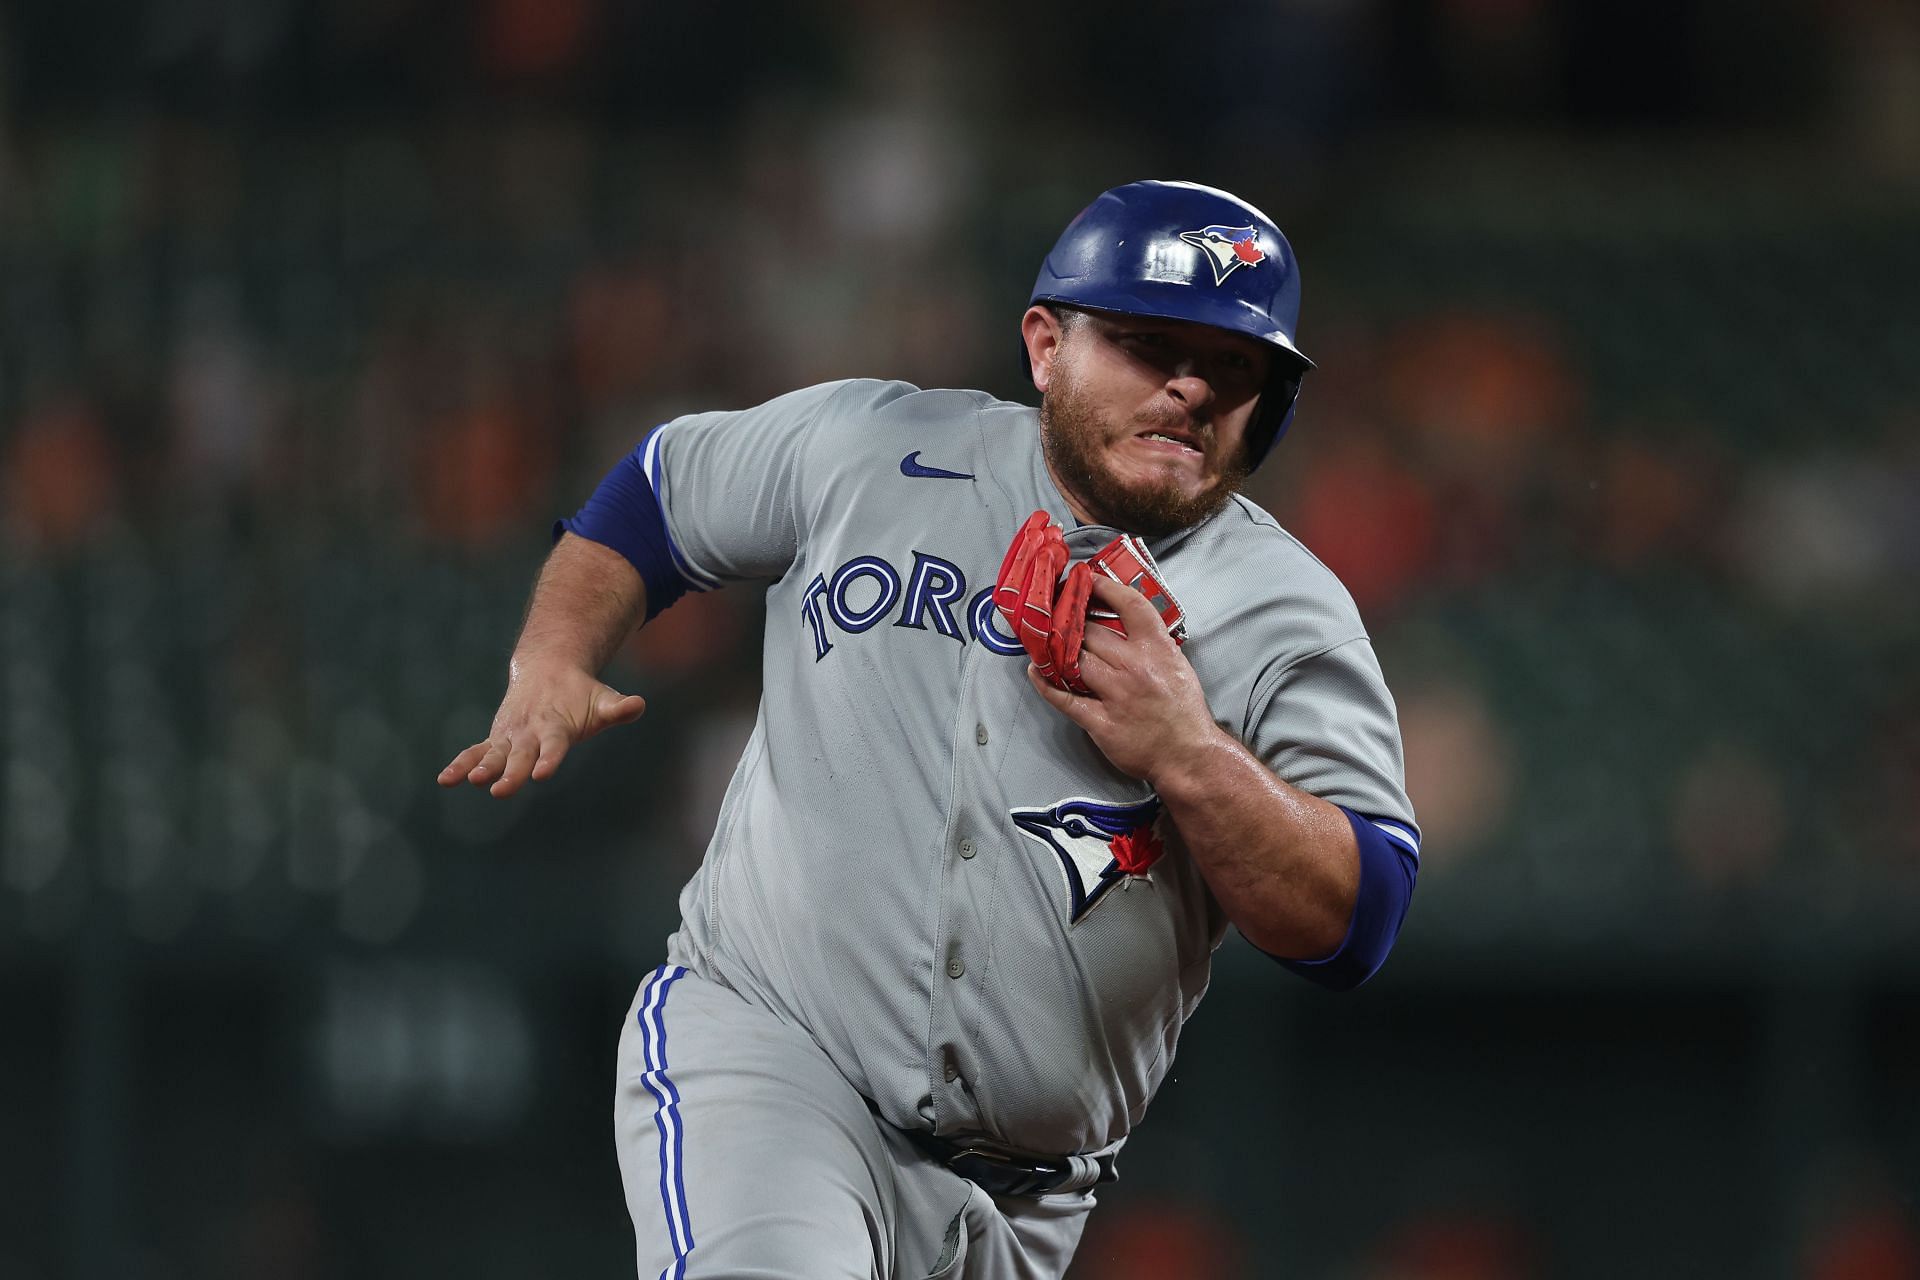 Blue Jays: Alejandro Kirk Baby Watch is officially over, daughter is born